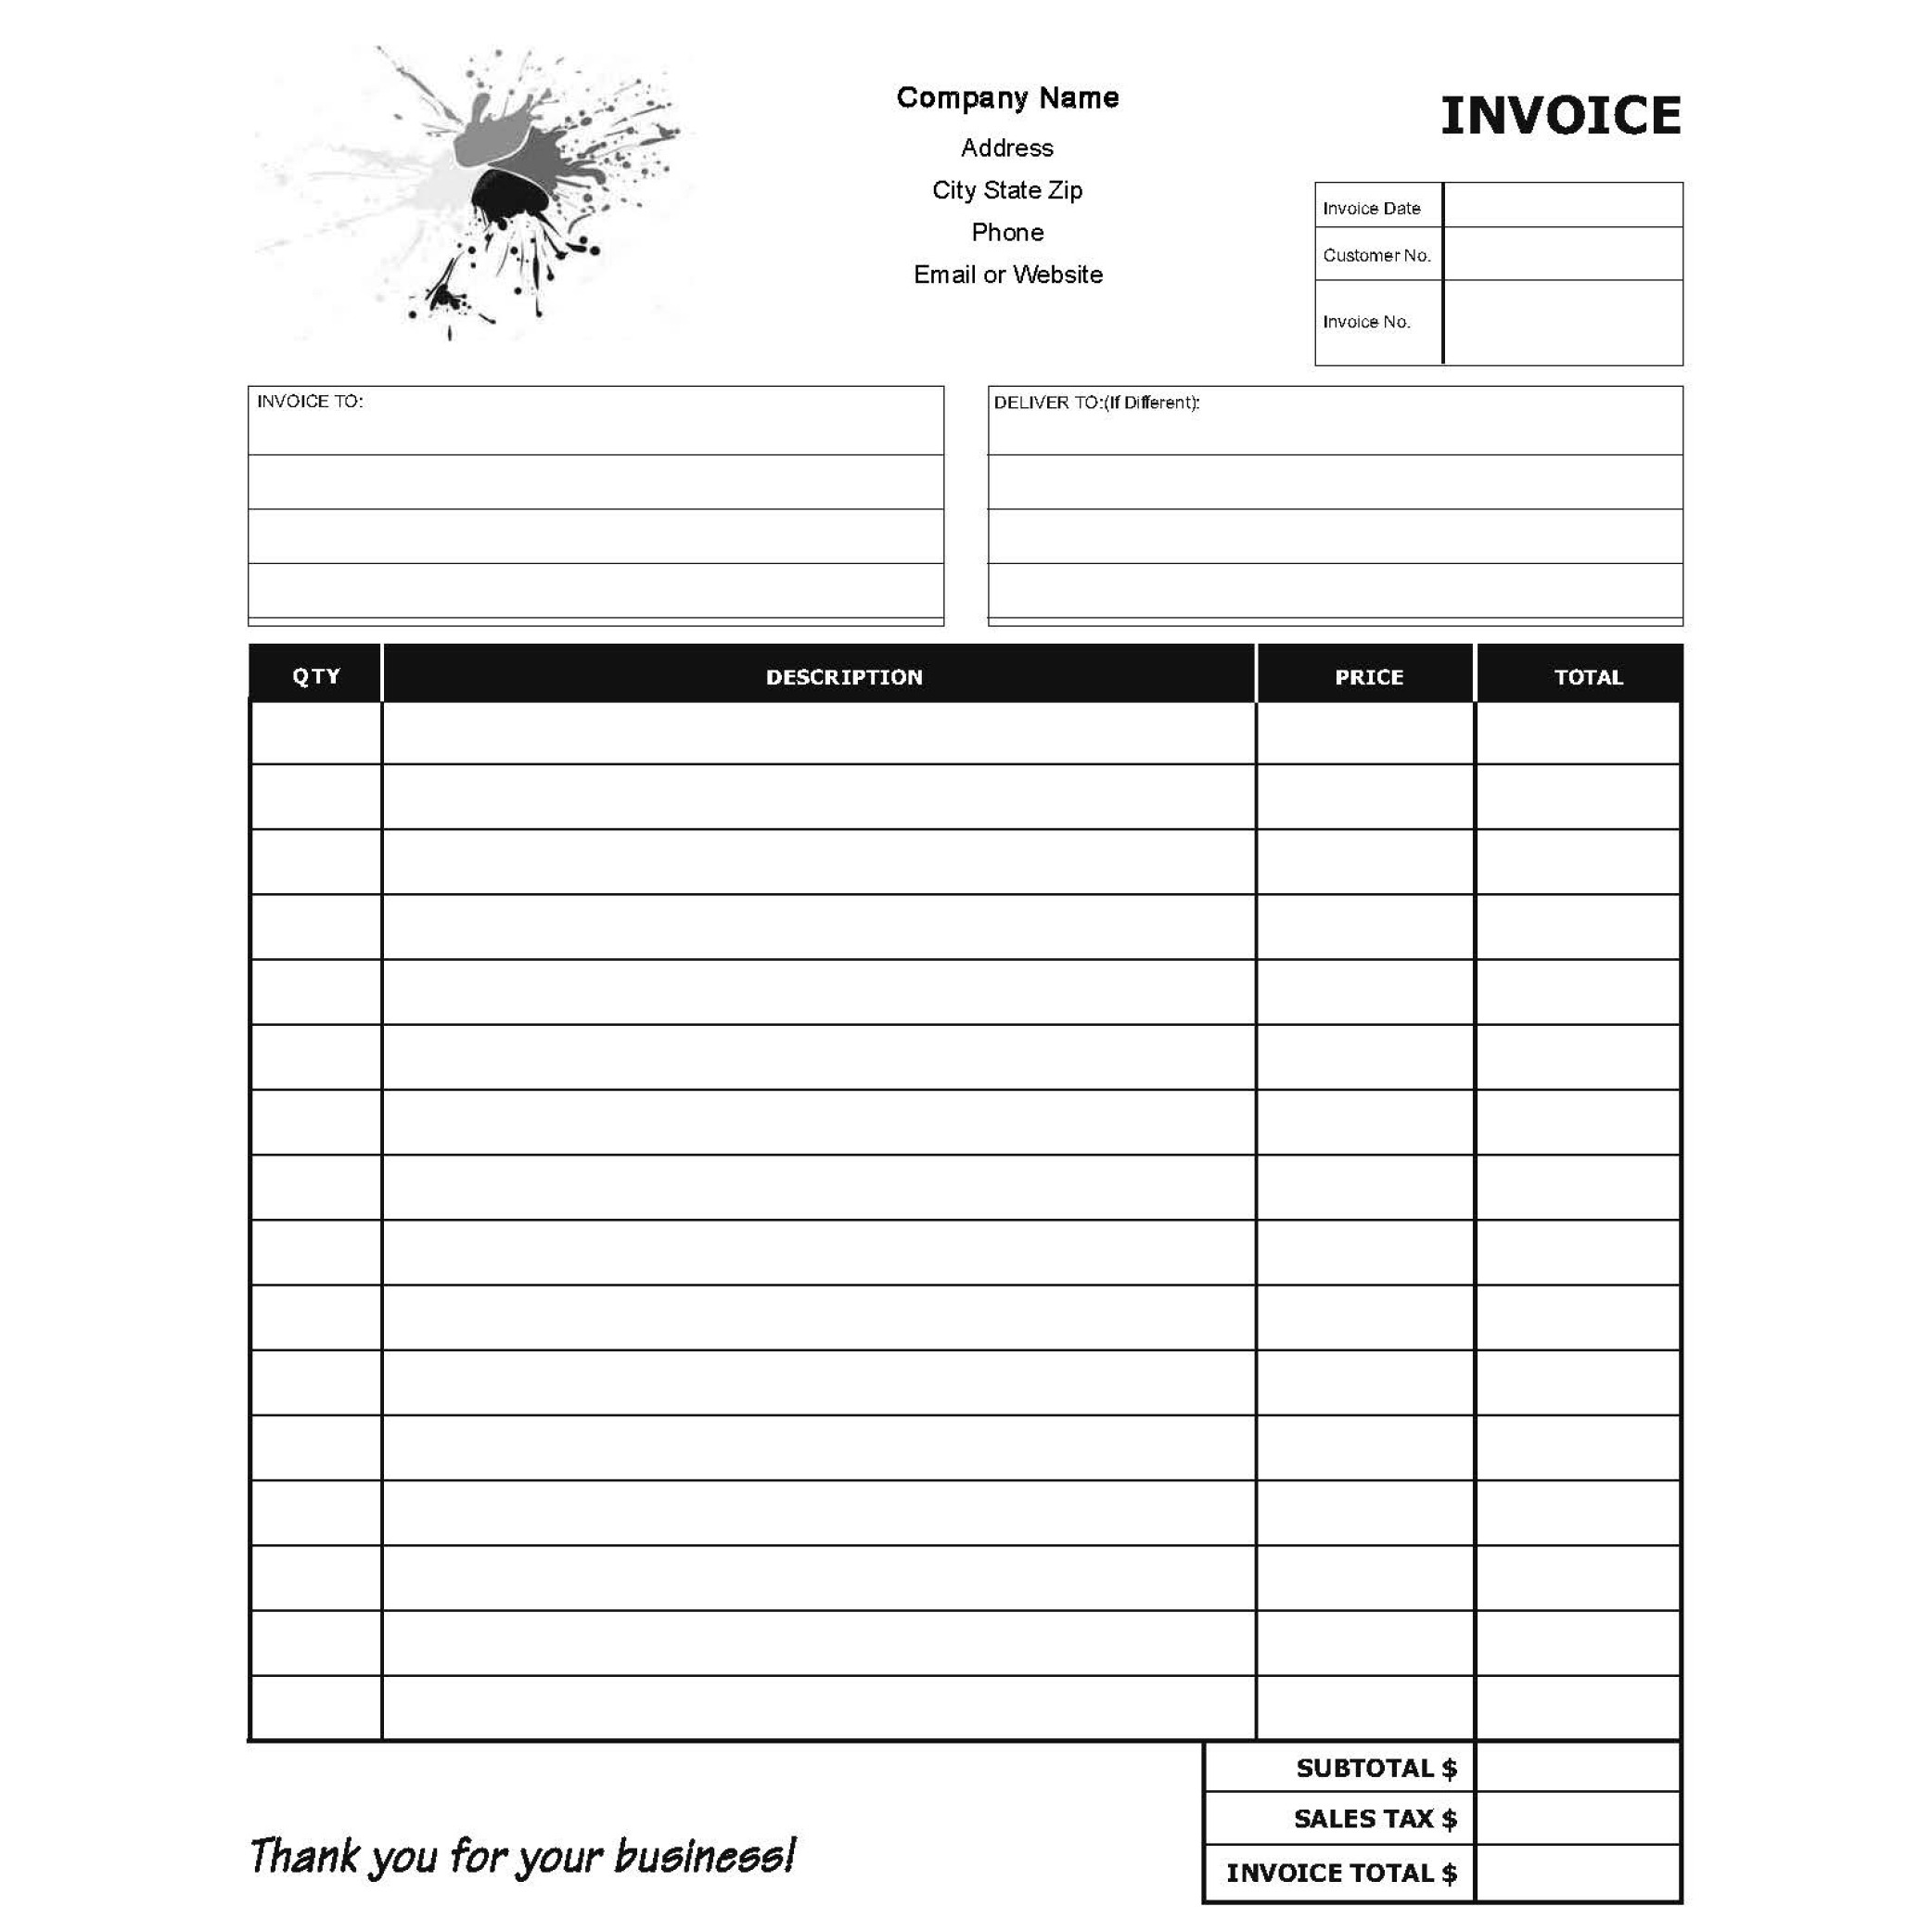 3 Part NCR Pads Invoice, Receipt, Order, Delivery Note Pads